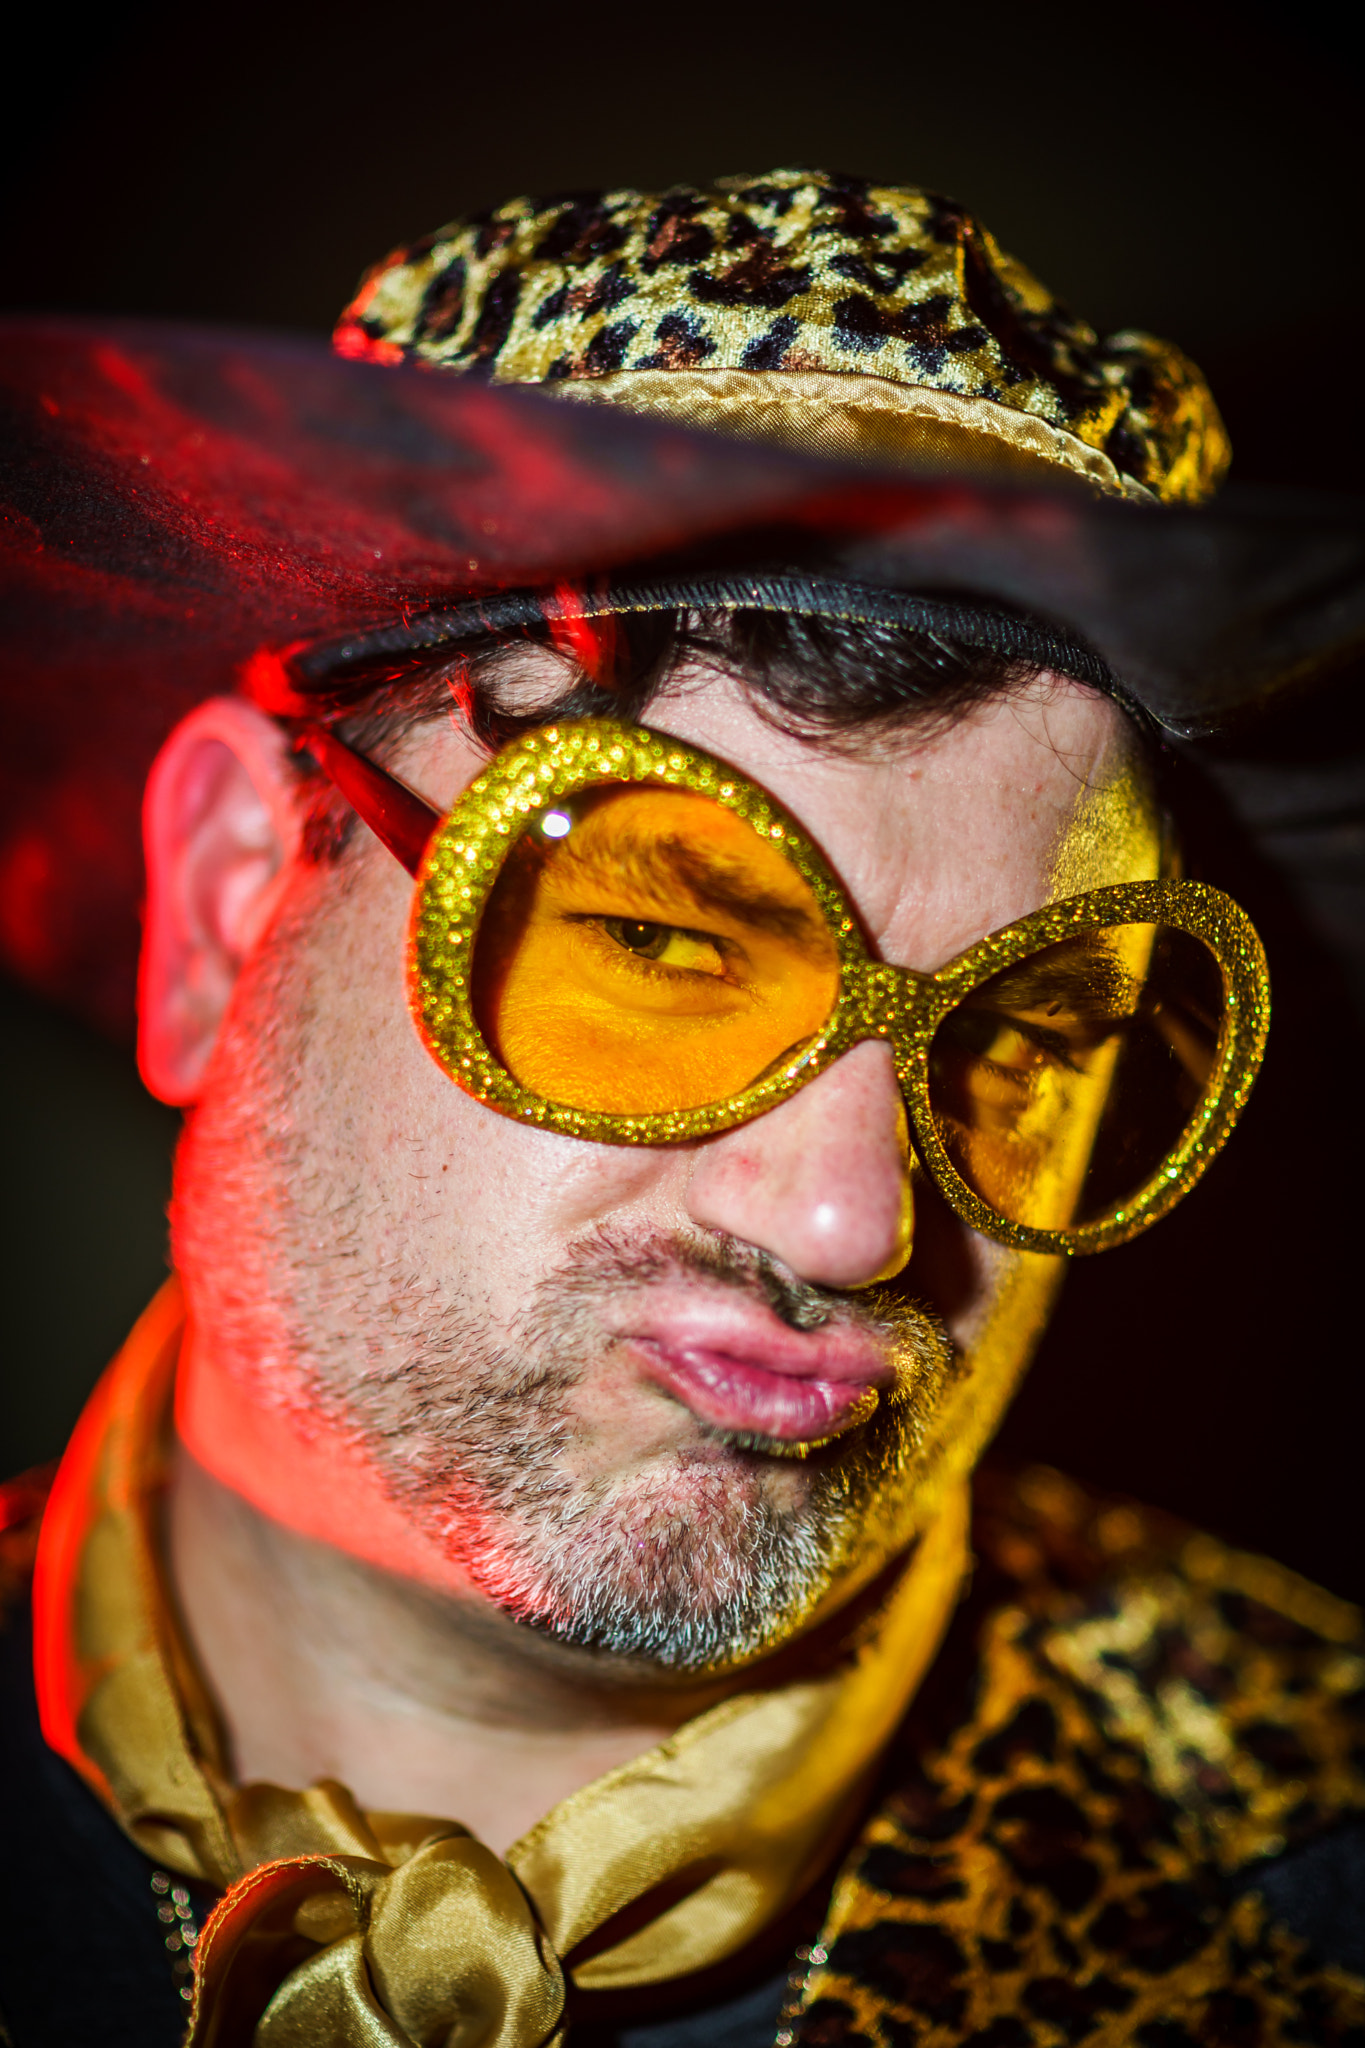 Sony a99 II sample photo. Reportage portrait from the carnival party photography